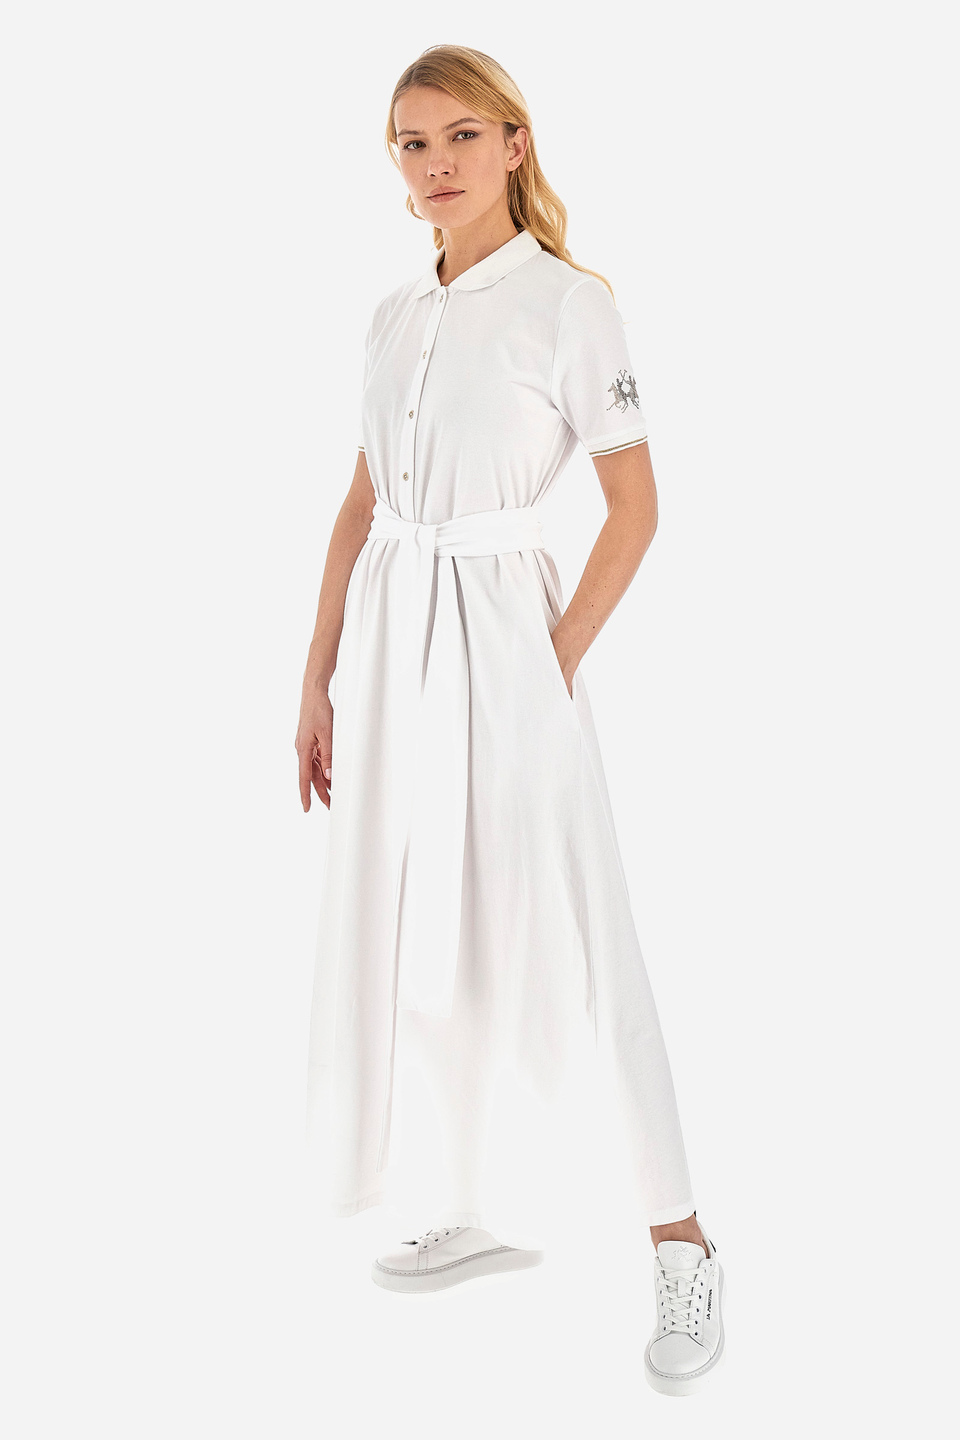 Women's long dress in cotton blend with short sleeves- | La Martina - Official Online Shop